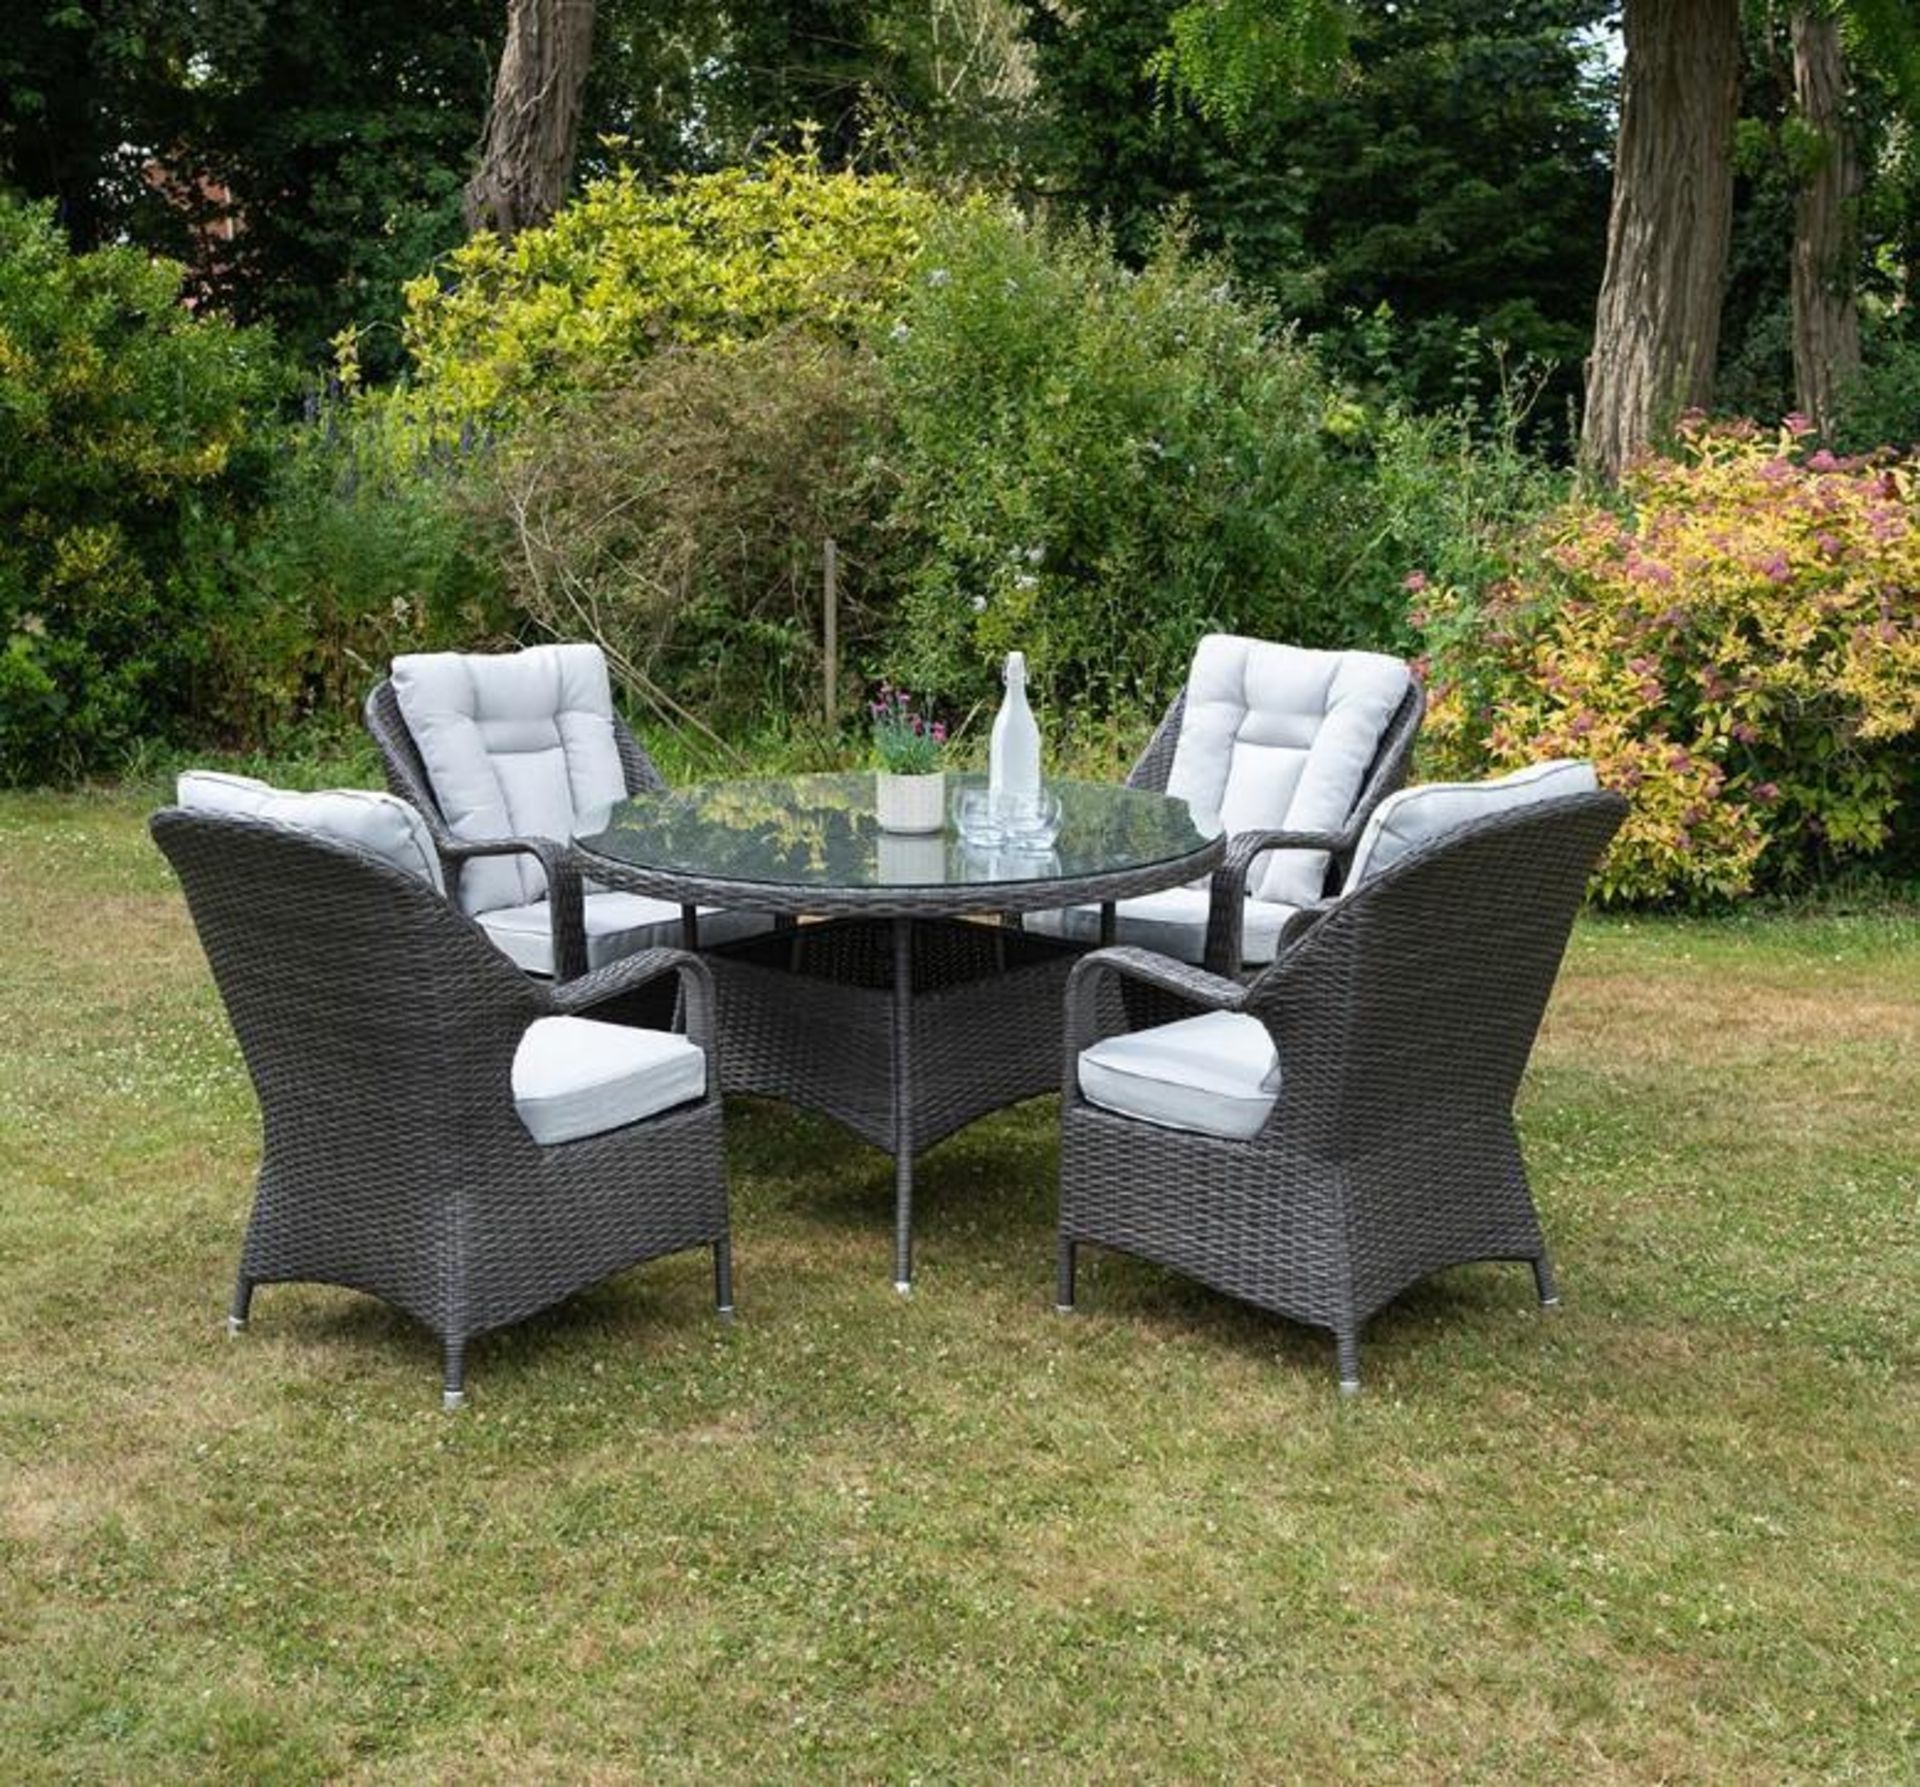 Brand New Moda Furniture 4 Seater Outdoor Rattan Round Table Dining Set in Grey with Grey - Image 10 of 10